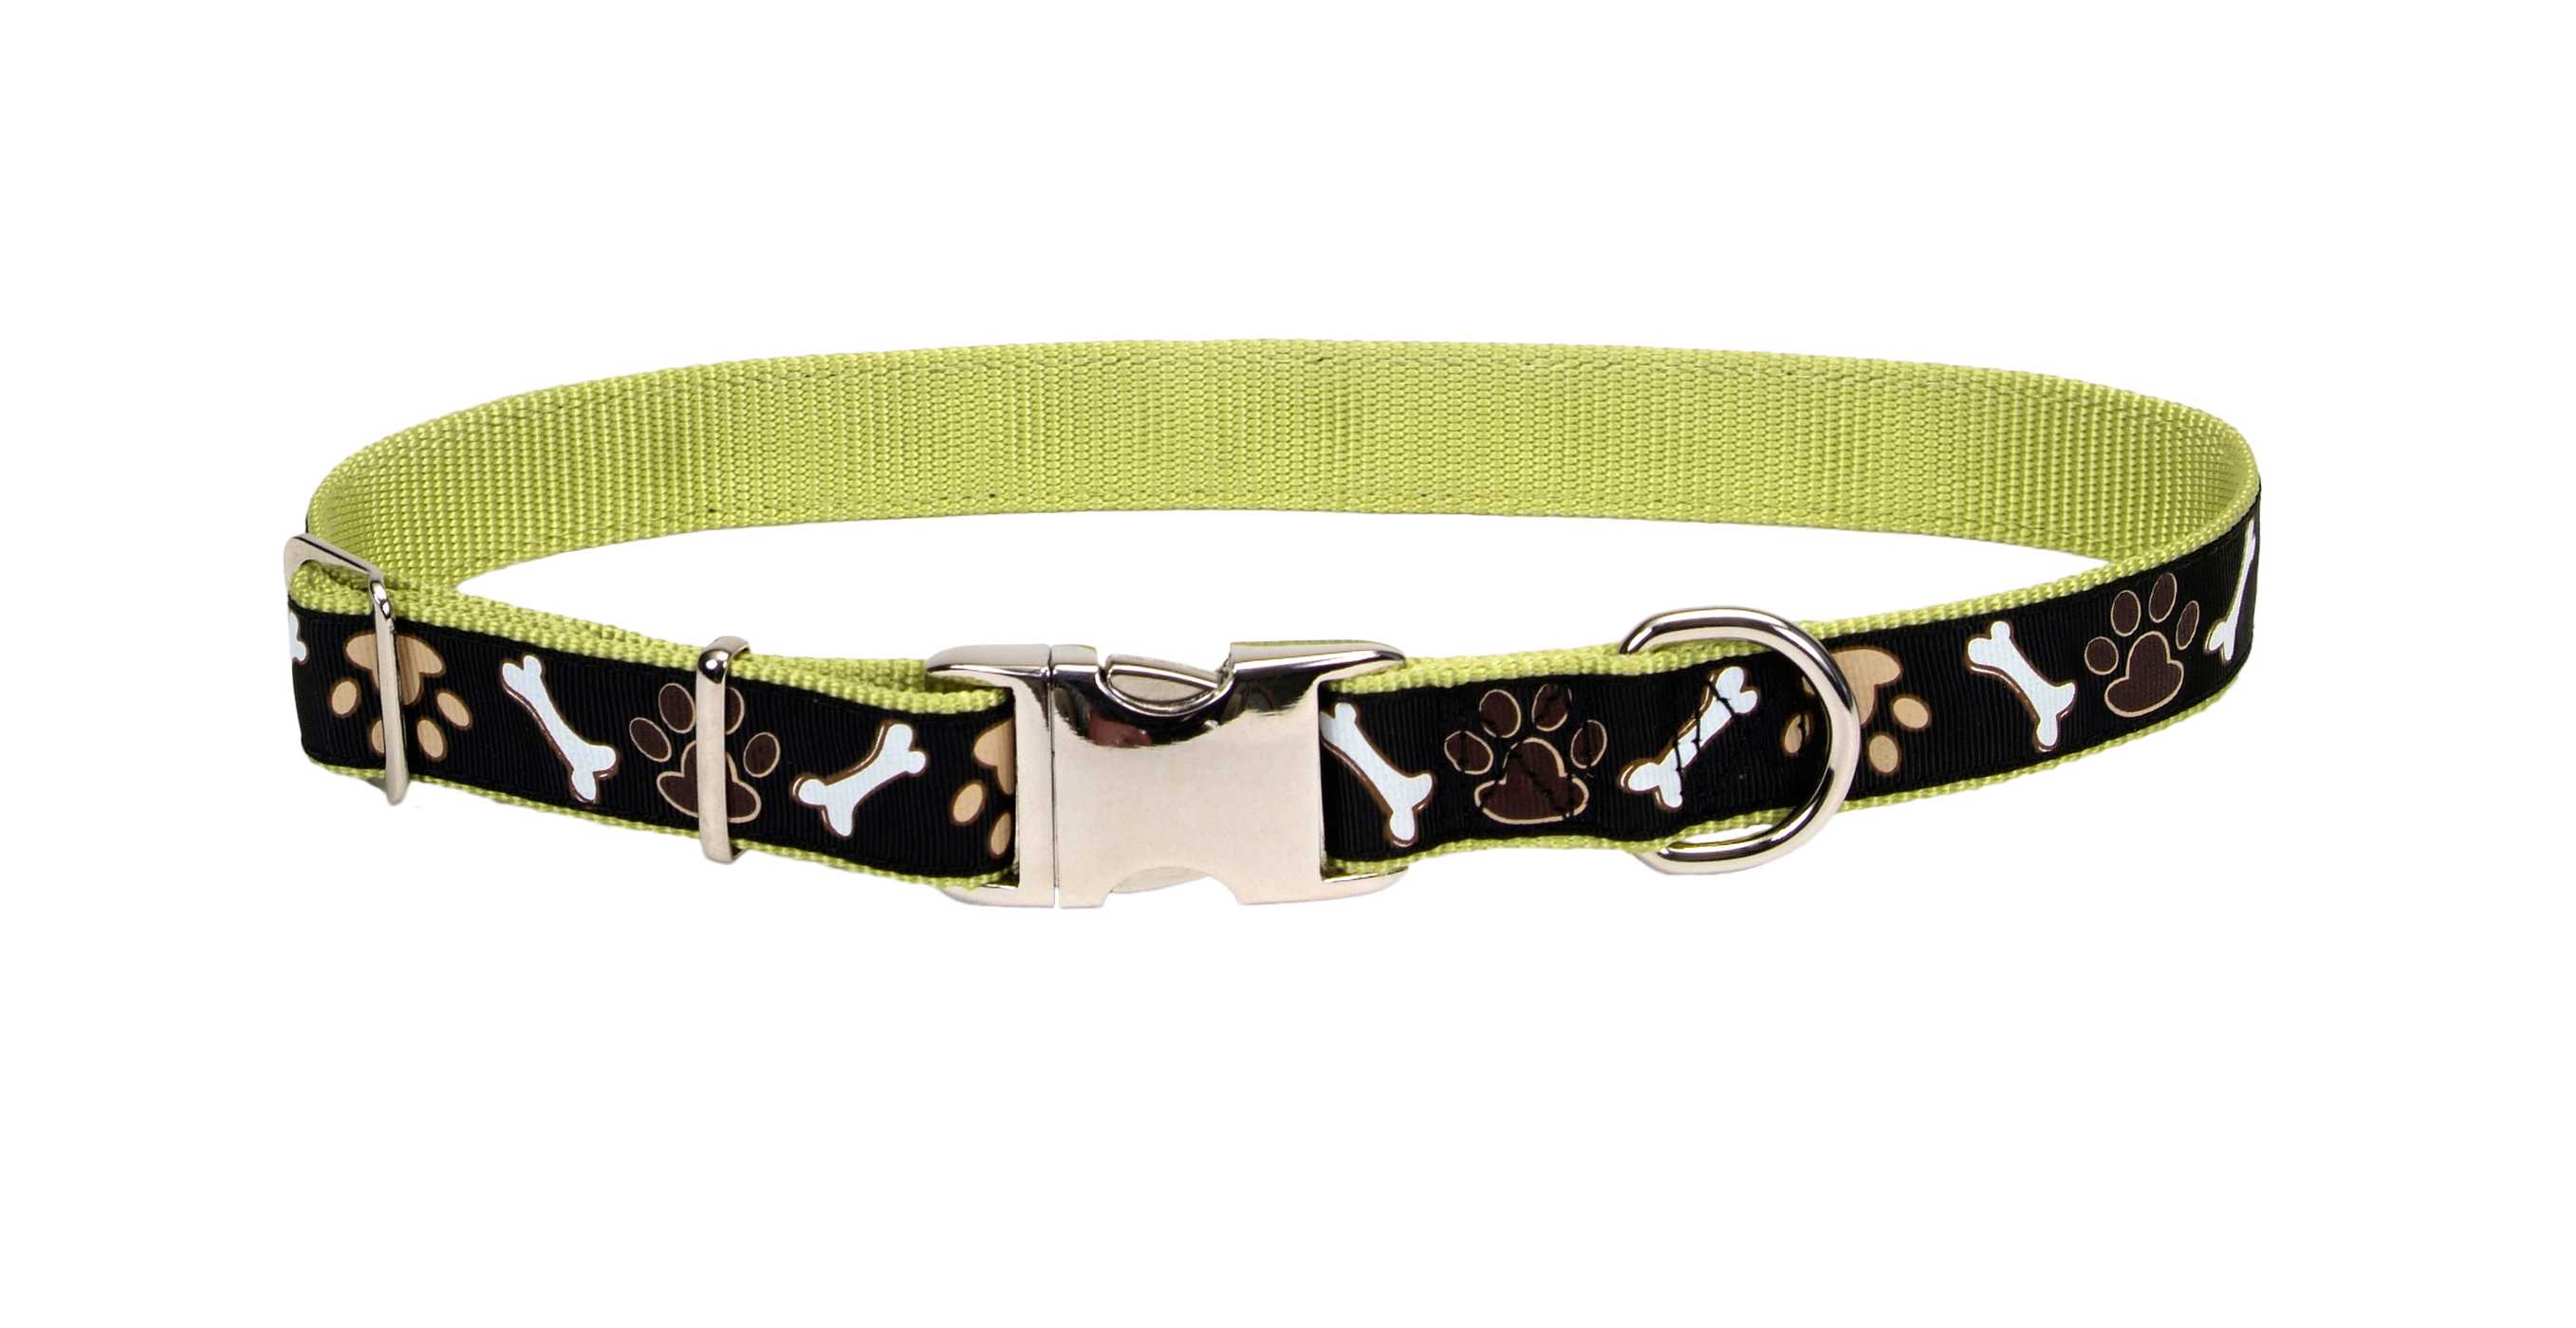 Coastal Pet Products Pet Attire 5/8 Inch Adjustable Nylon Collar with Brown Paws and Bones; image 2 of 2